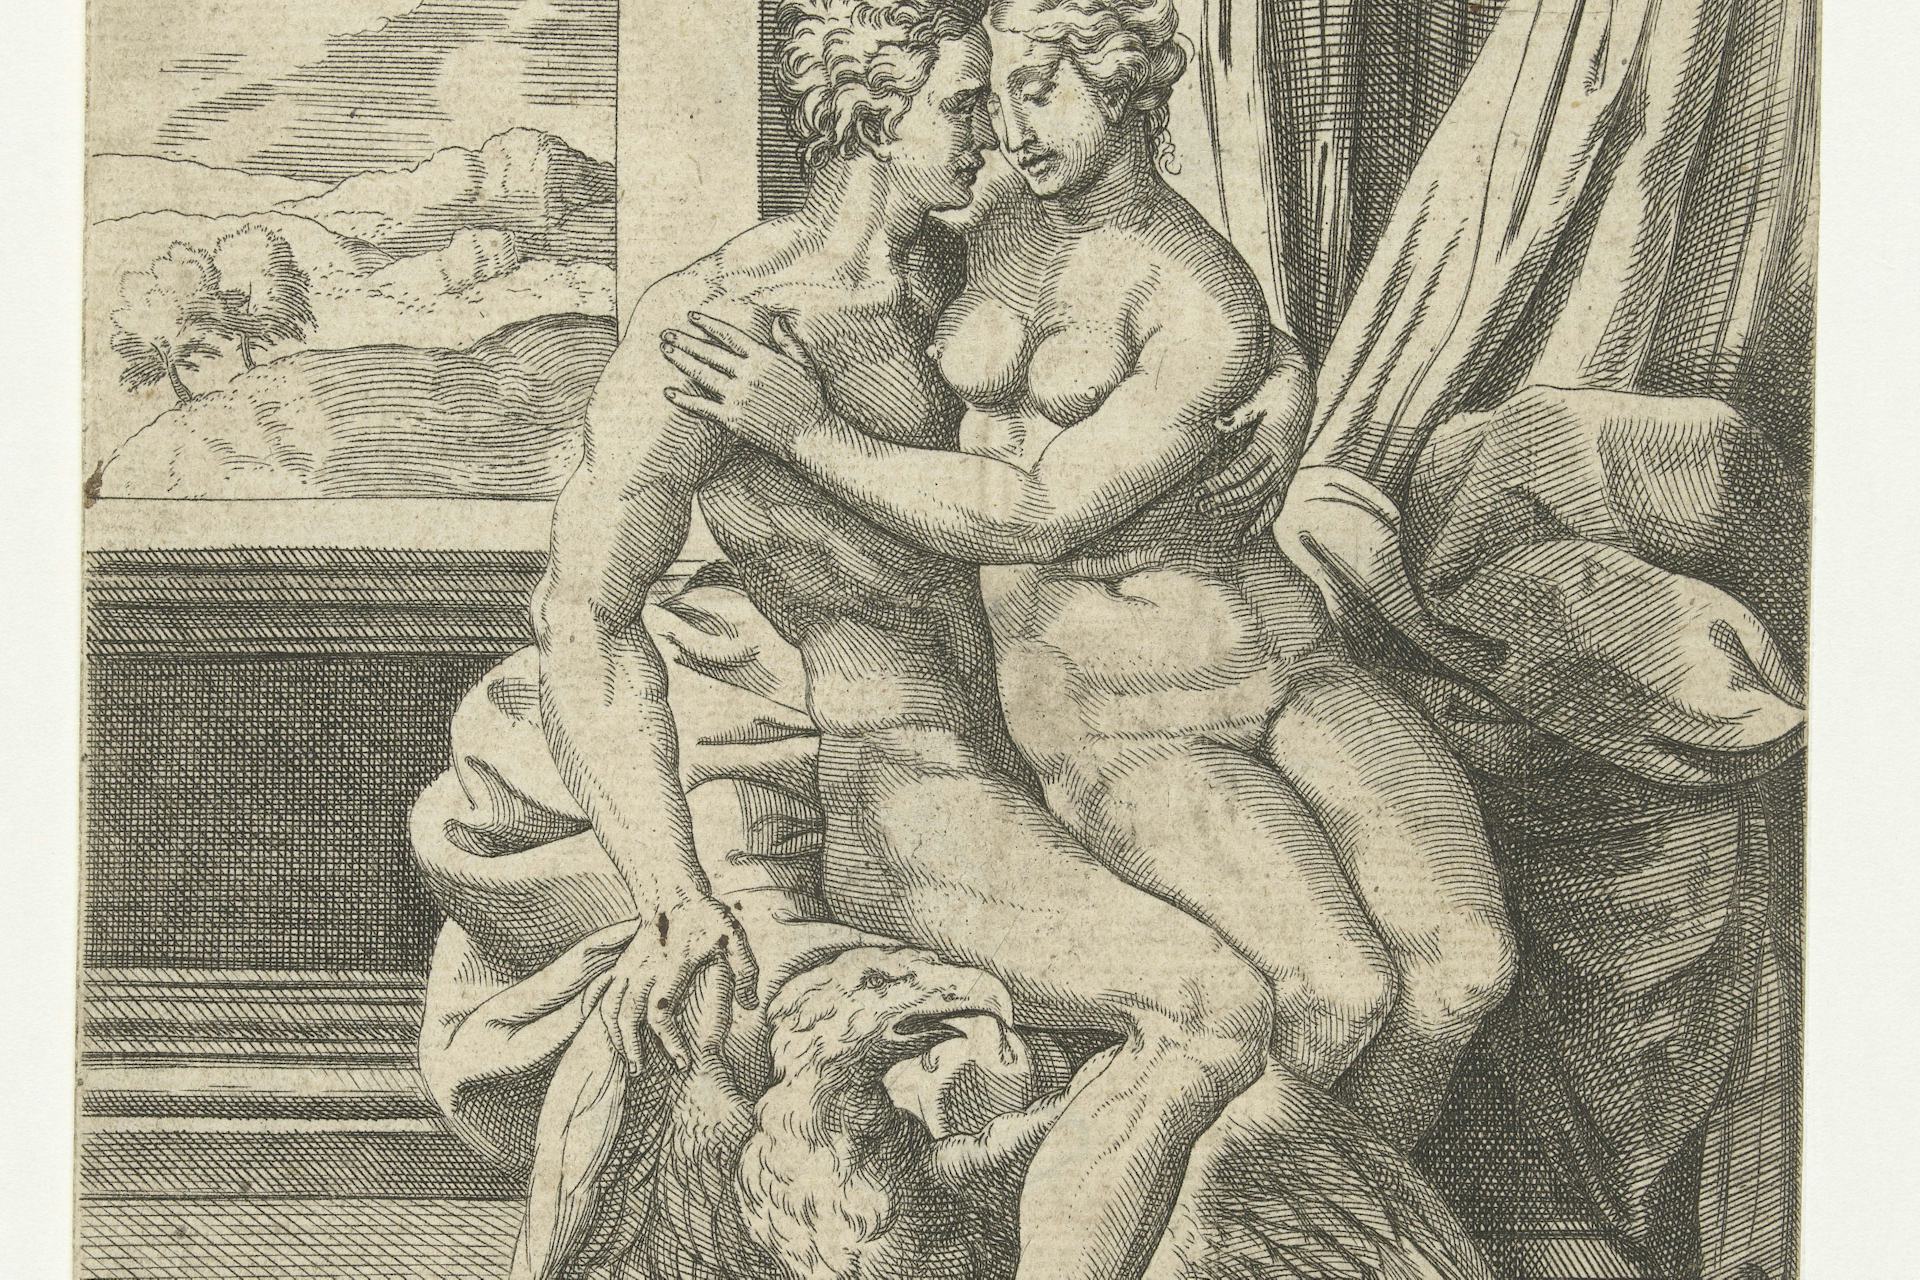 Jupiter and Alcmene by Cornelis Bos, after Michiel Coxie